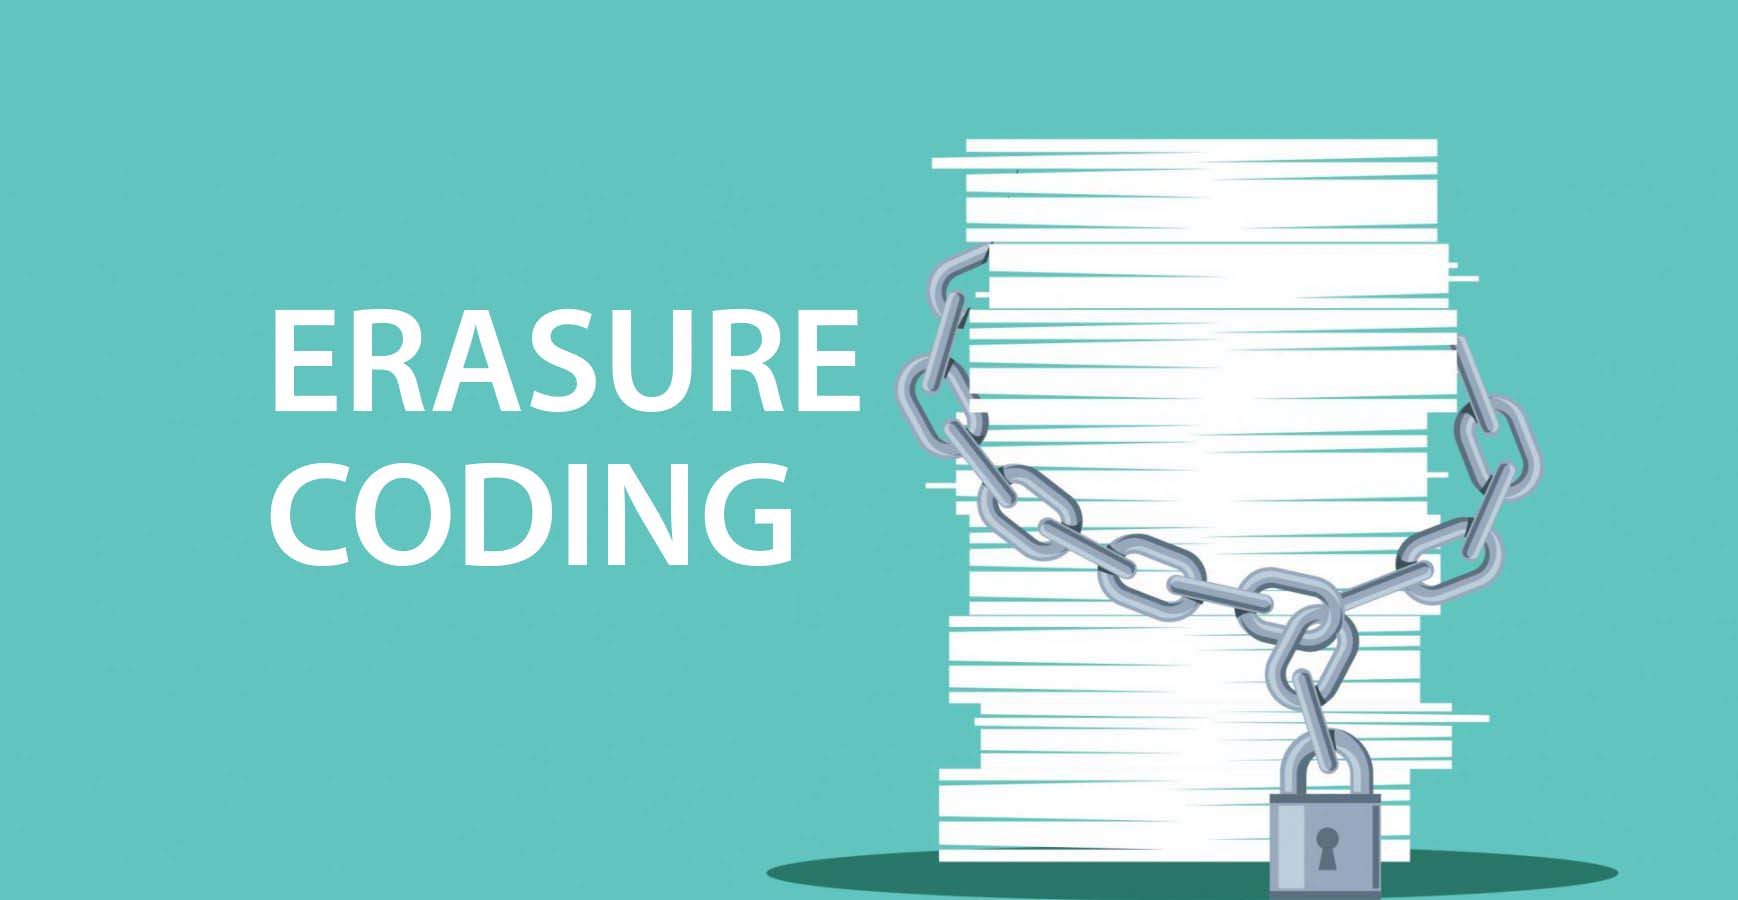 Erasure Coding for Data Protection and Disaster Recovery